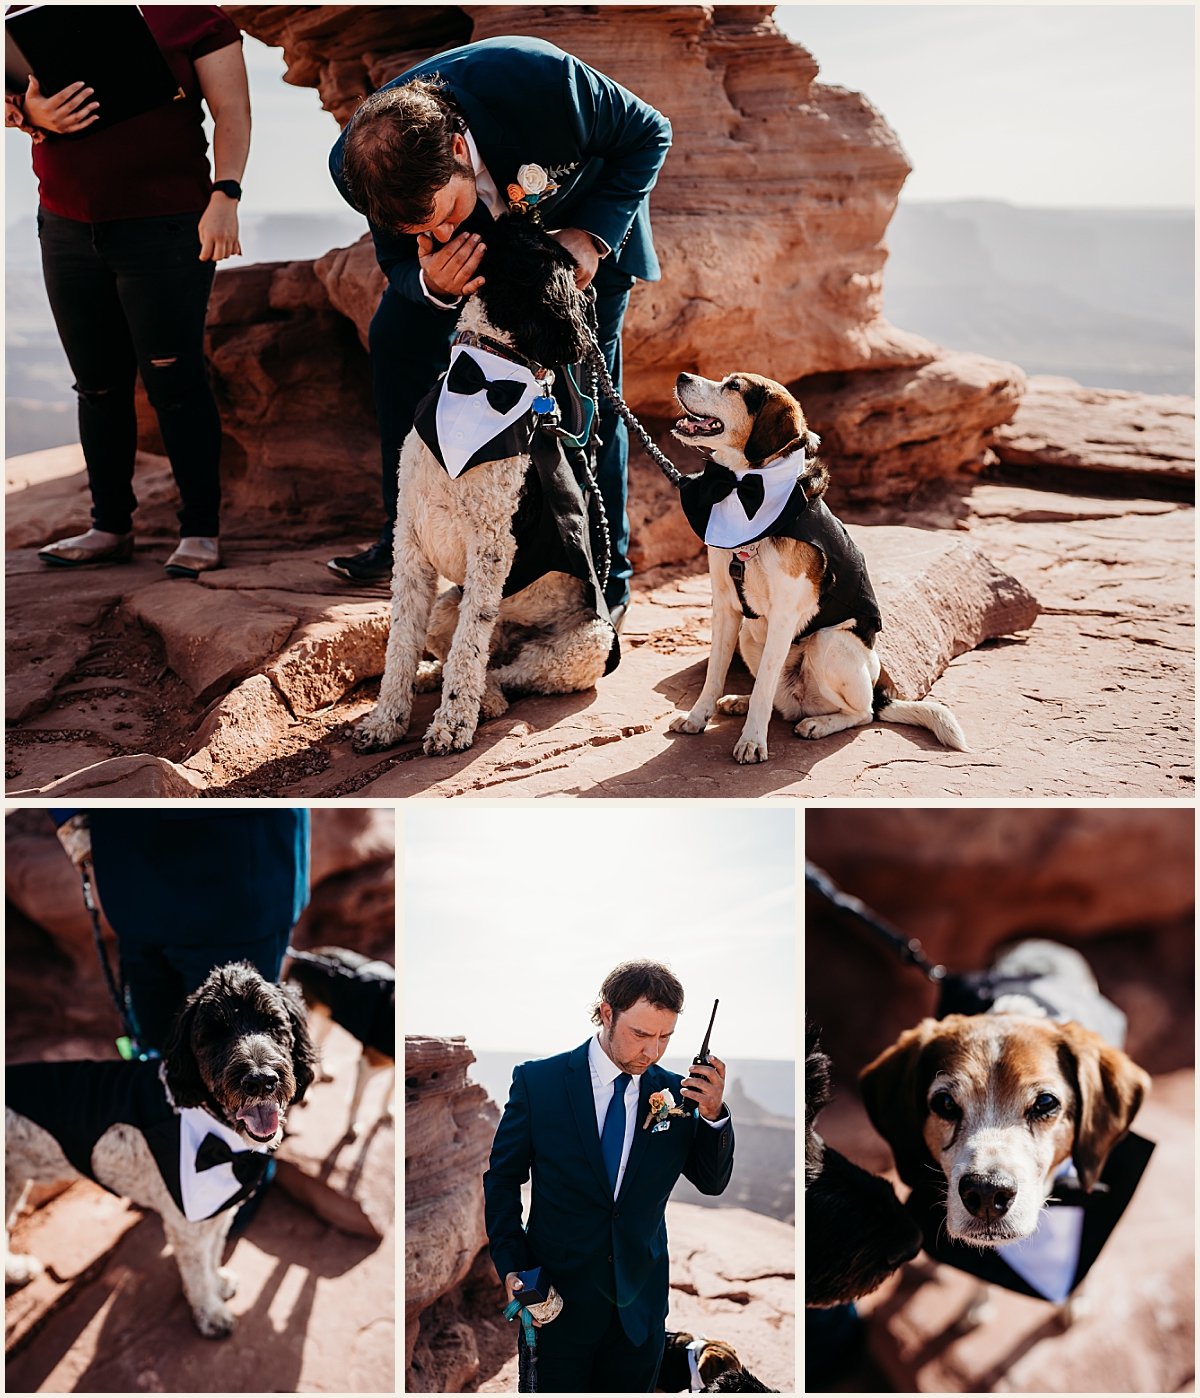 Groom and dogs waiting for the bride at the scenic canyon alter | Lauren Crumpler Photography | Elopement Wedding Photographer